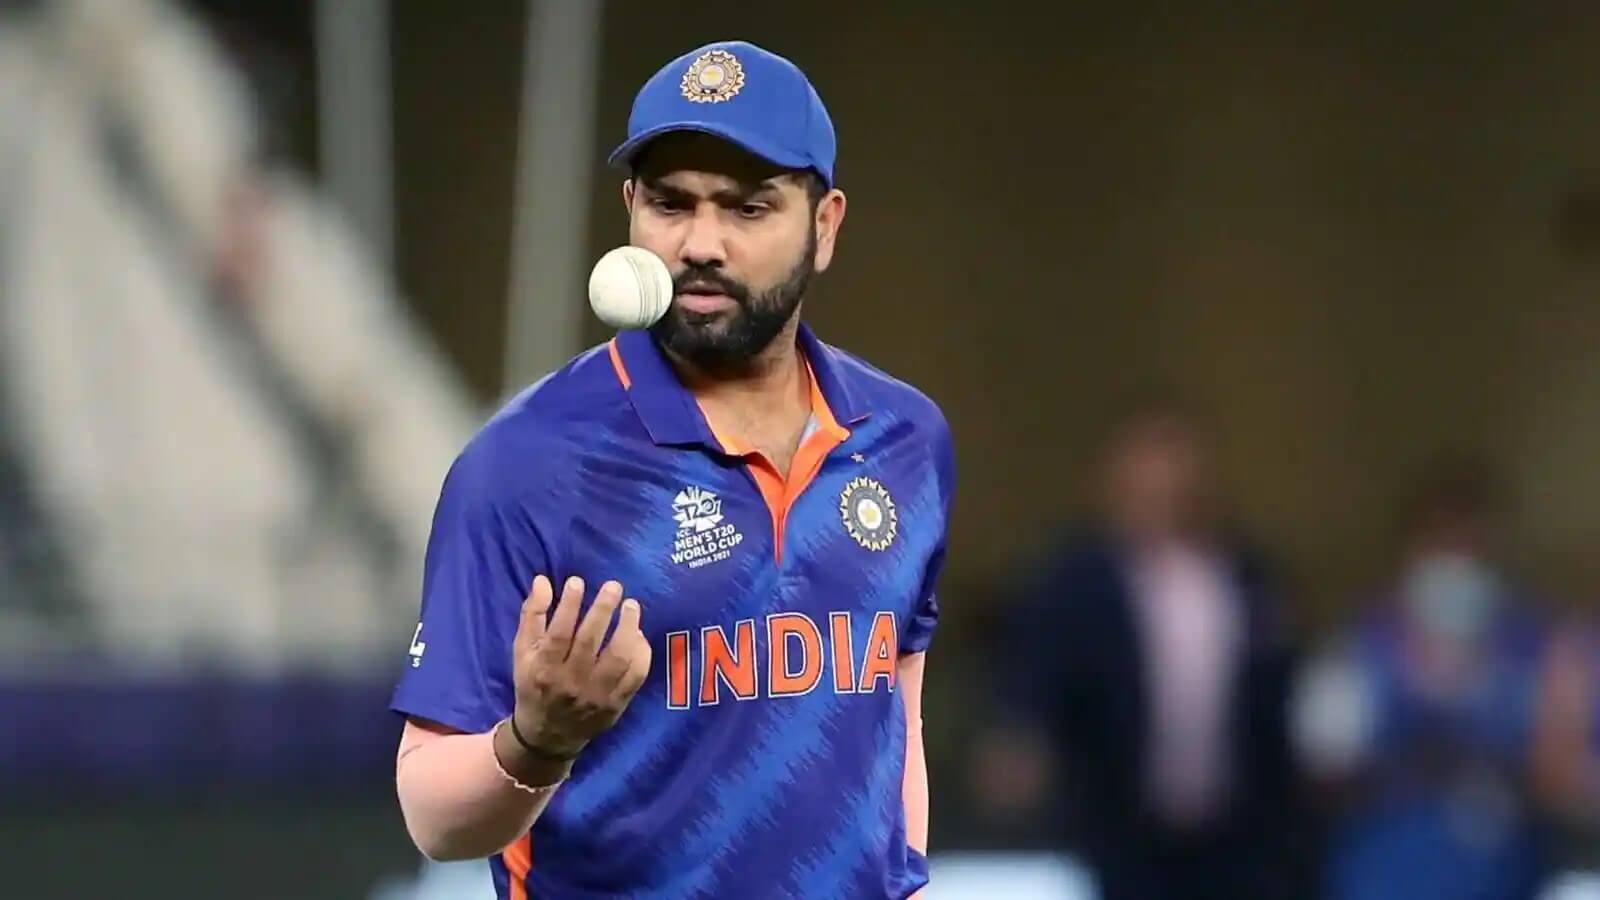 Rohit Sharma to Replace Virat Kohli and Lead the Indian T20 Squad as They Face off Against NZ in Jaipur on 17th Nov 2021